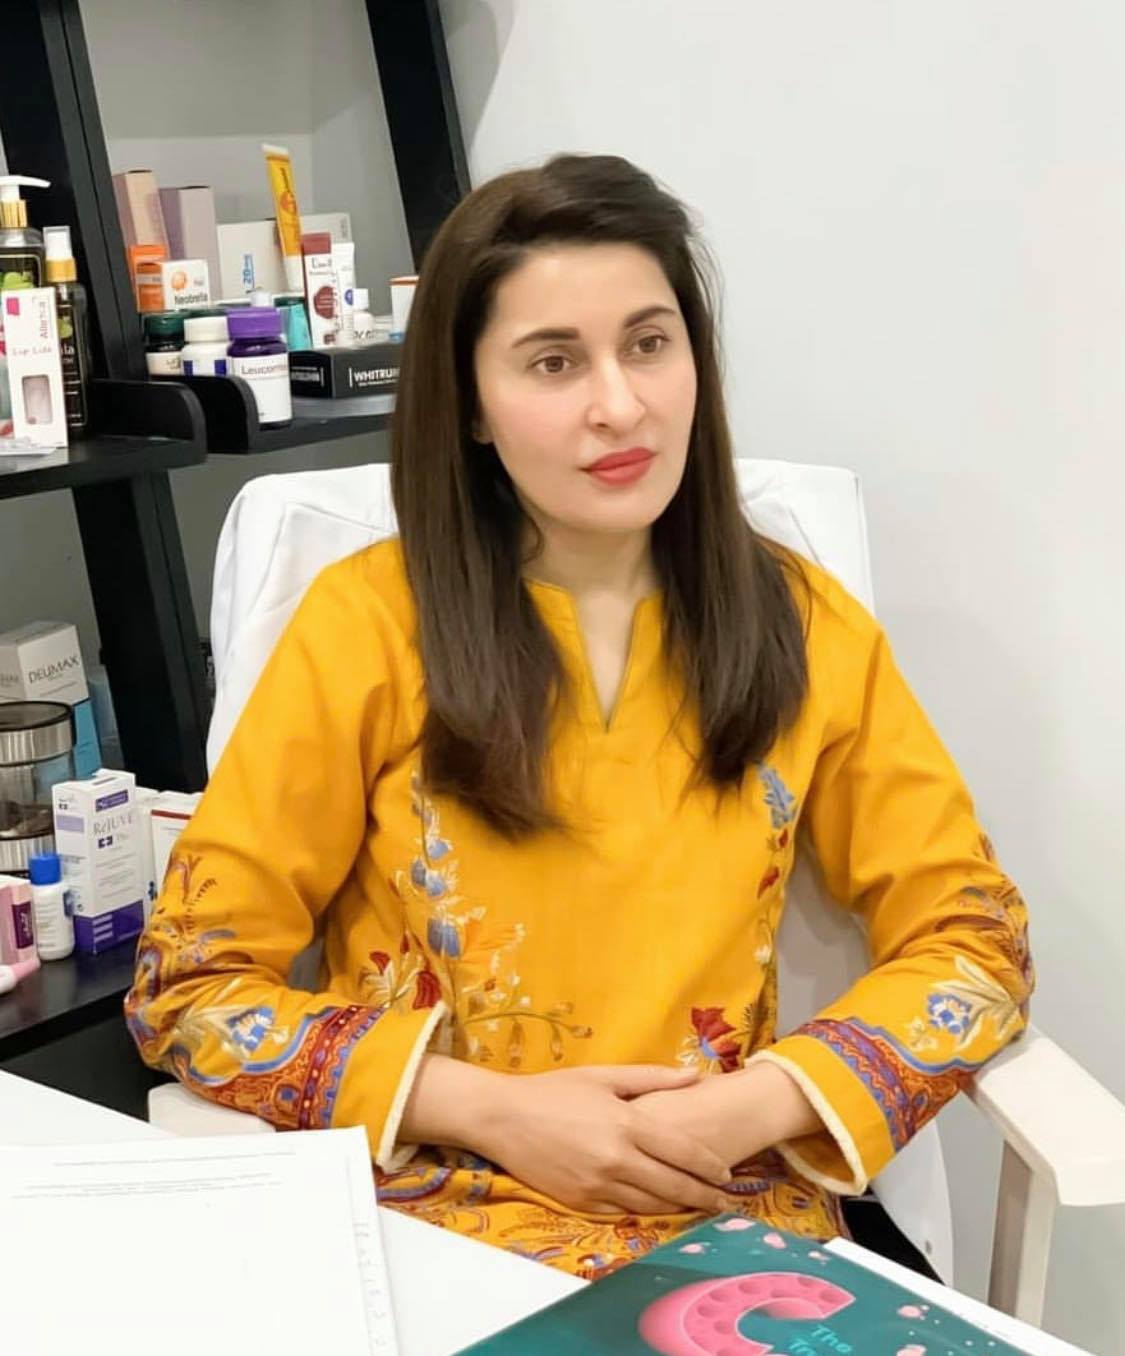 7 Pakistani Actors Who Are Also Doctors